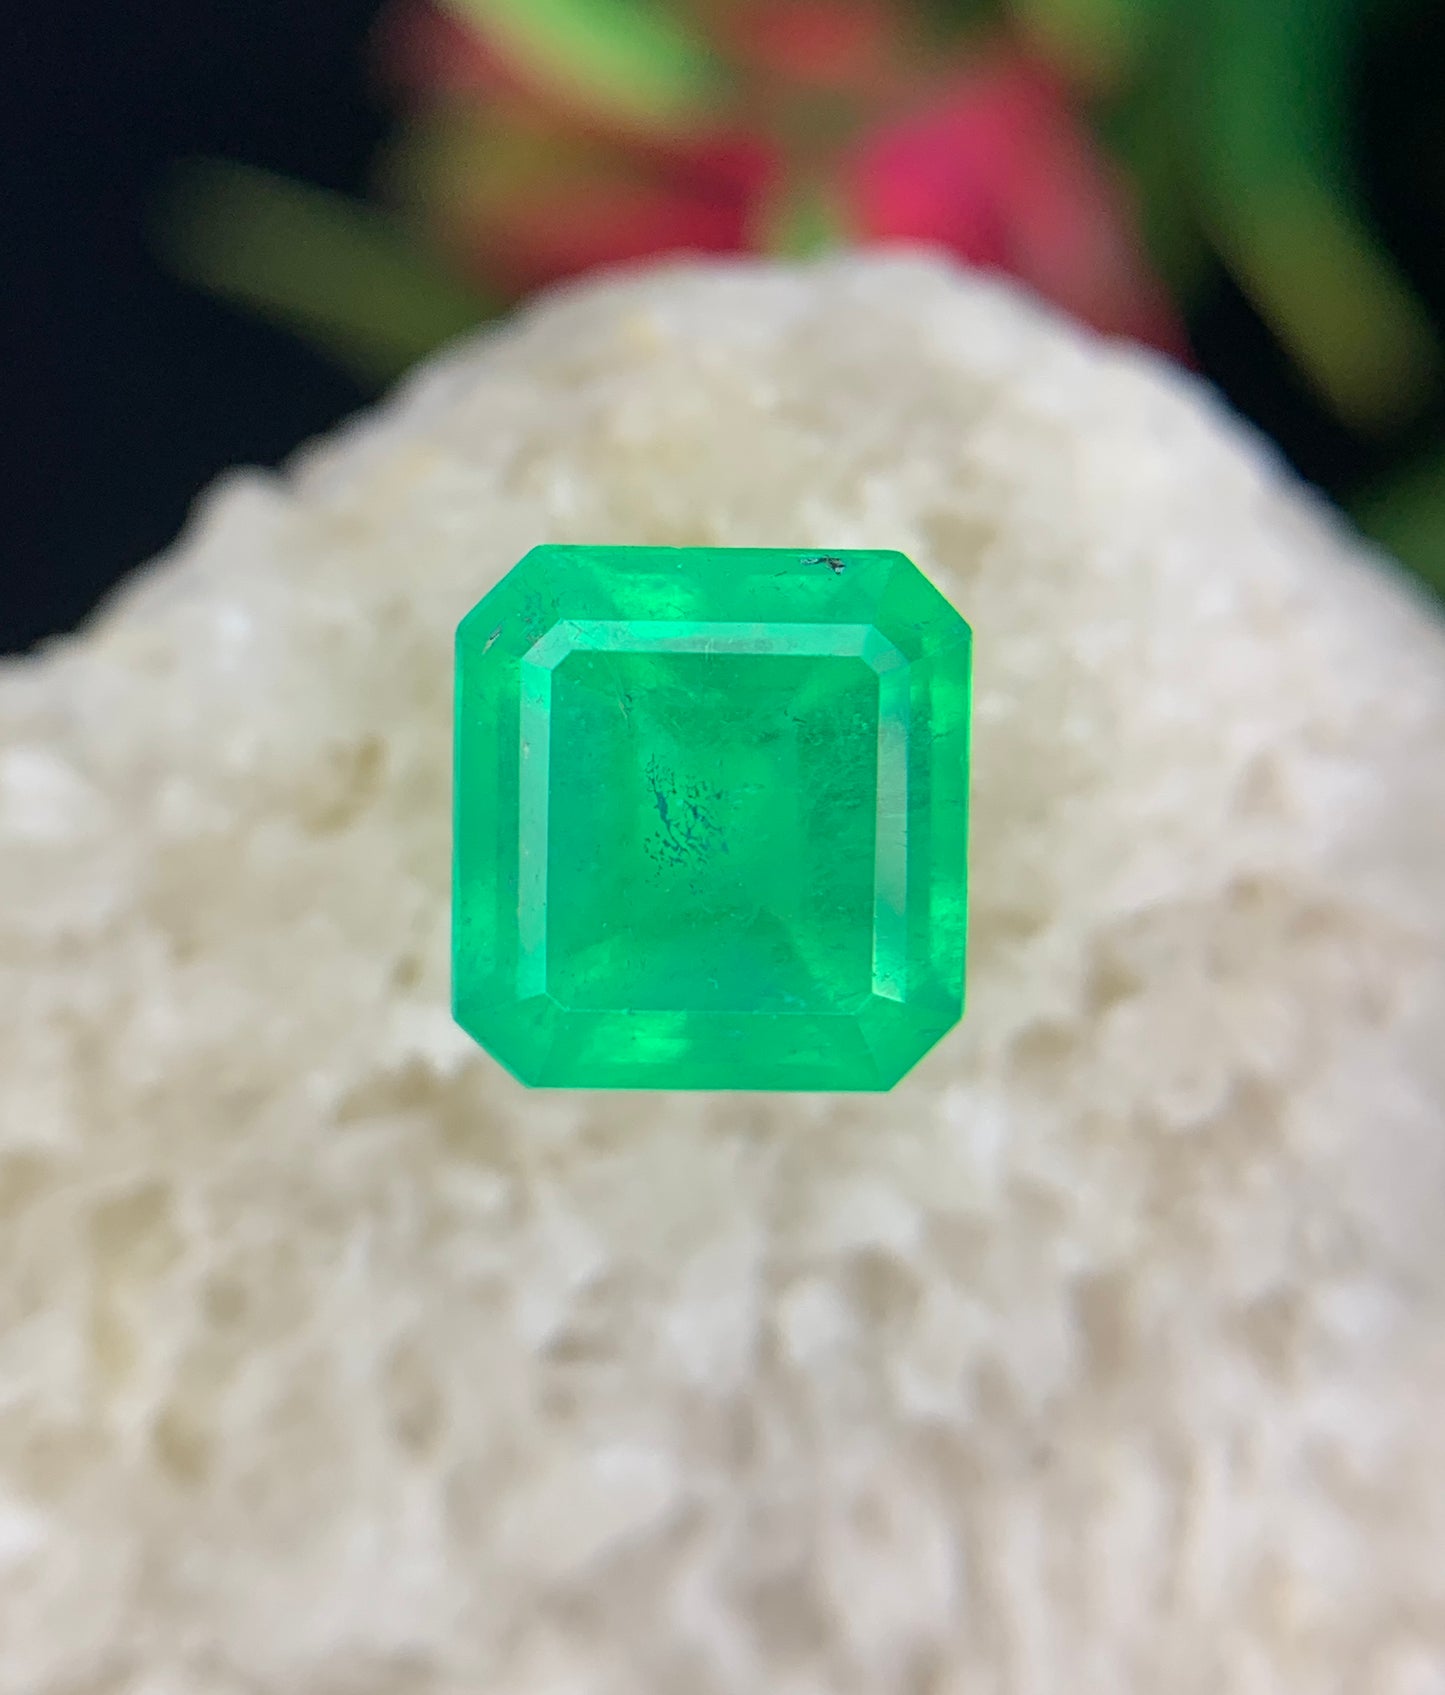 1.33 cts Colombian Emerald